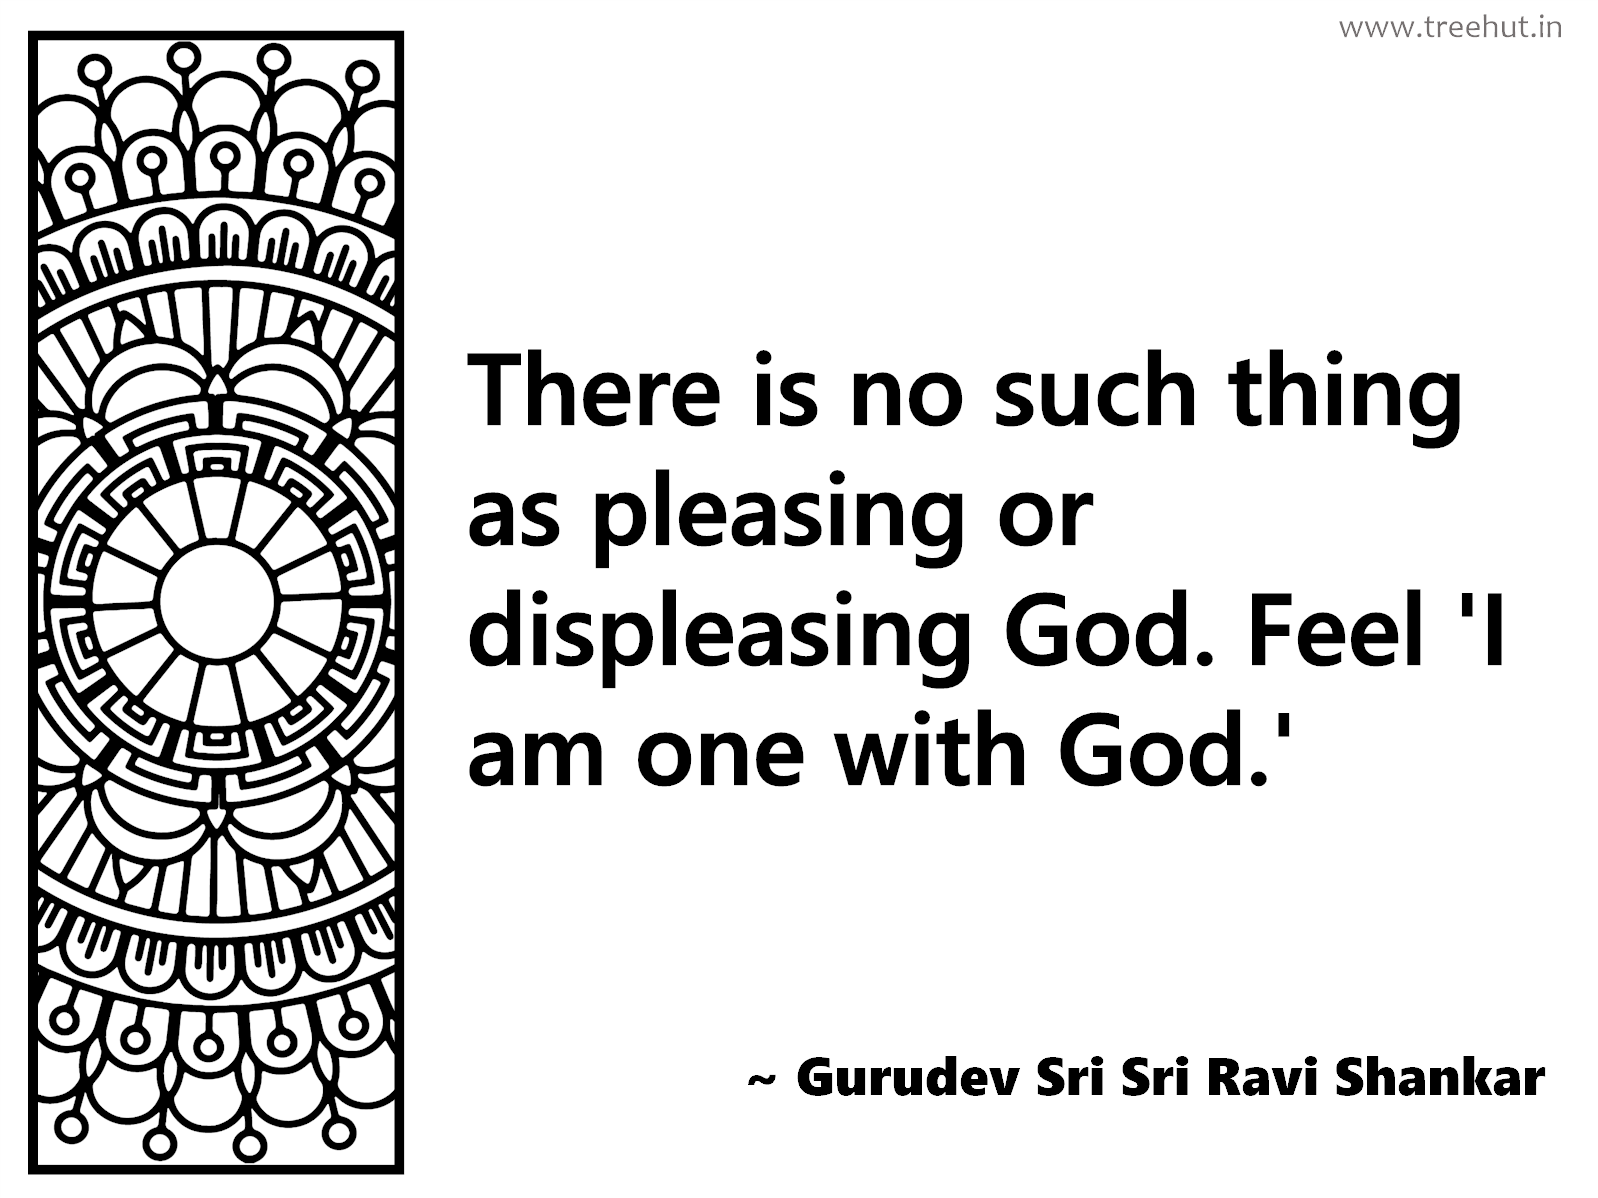 There is no such thing as pleasing or displeasing God. Feel 'I am one with God.' Inspirational Quote by Gurudev Sri Sri Ravi Shankar, coloring pages